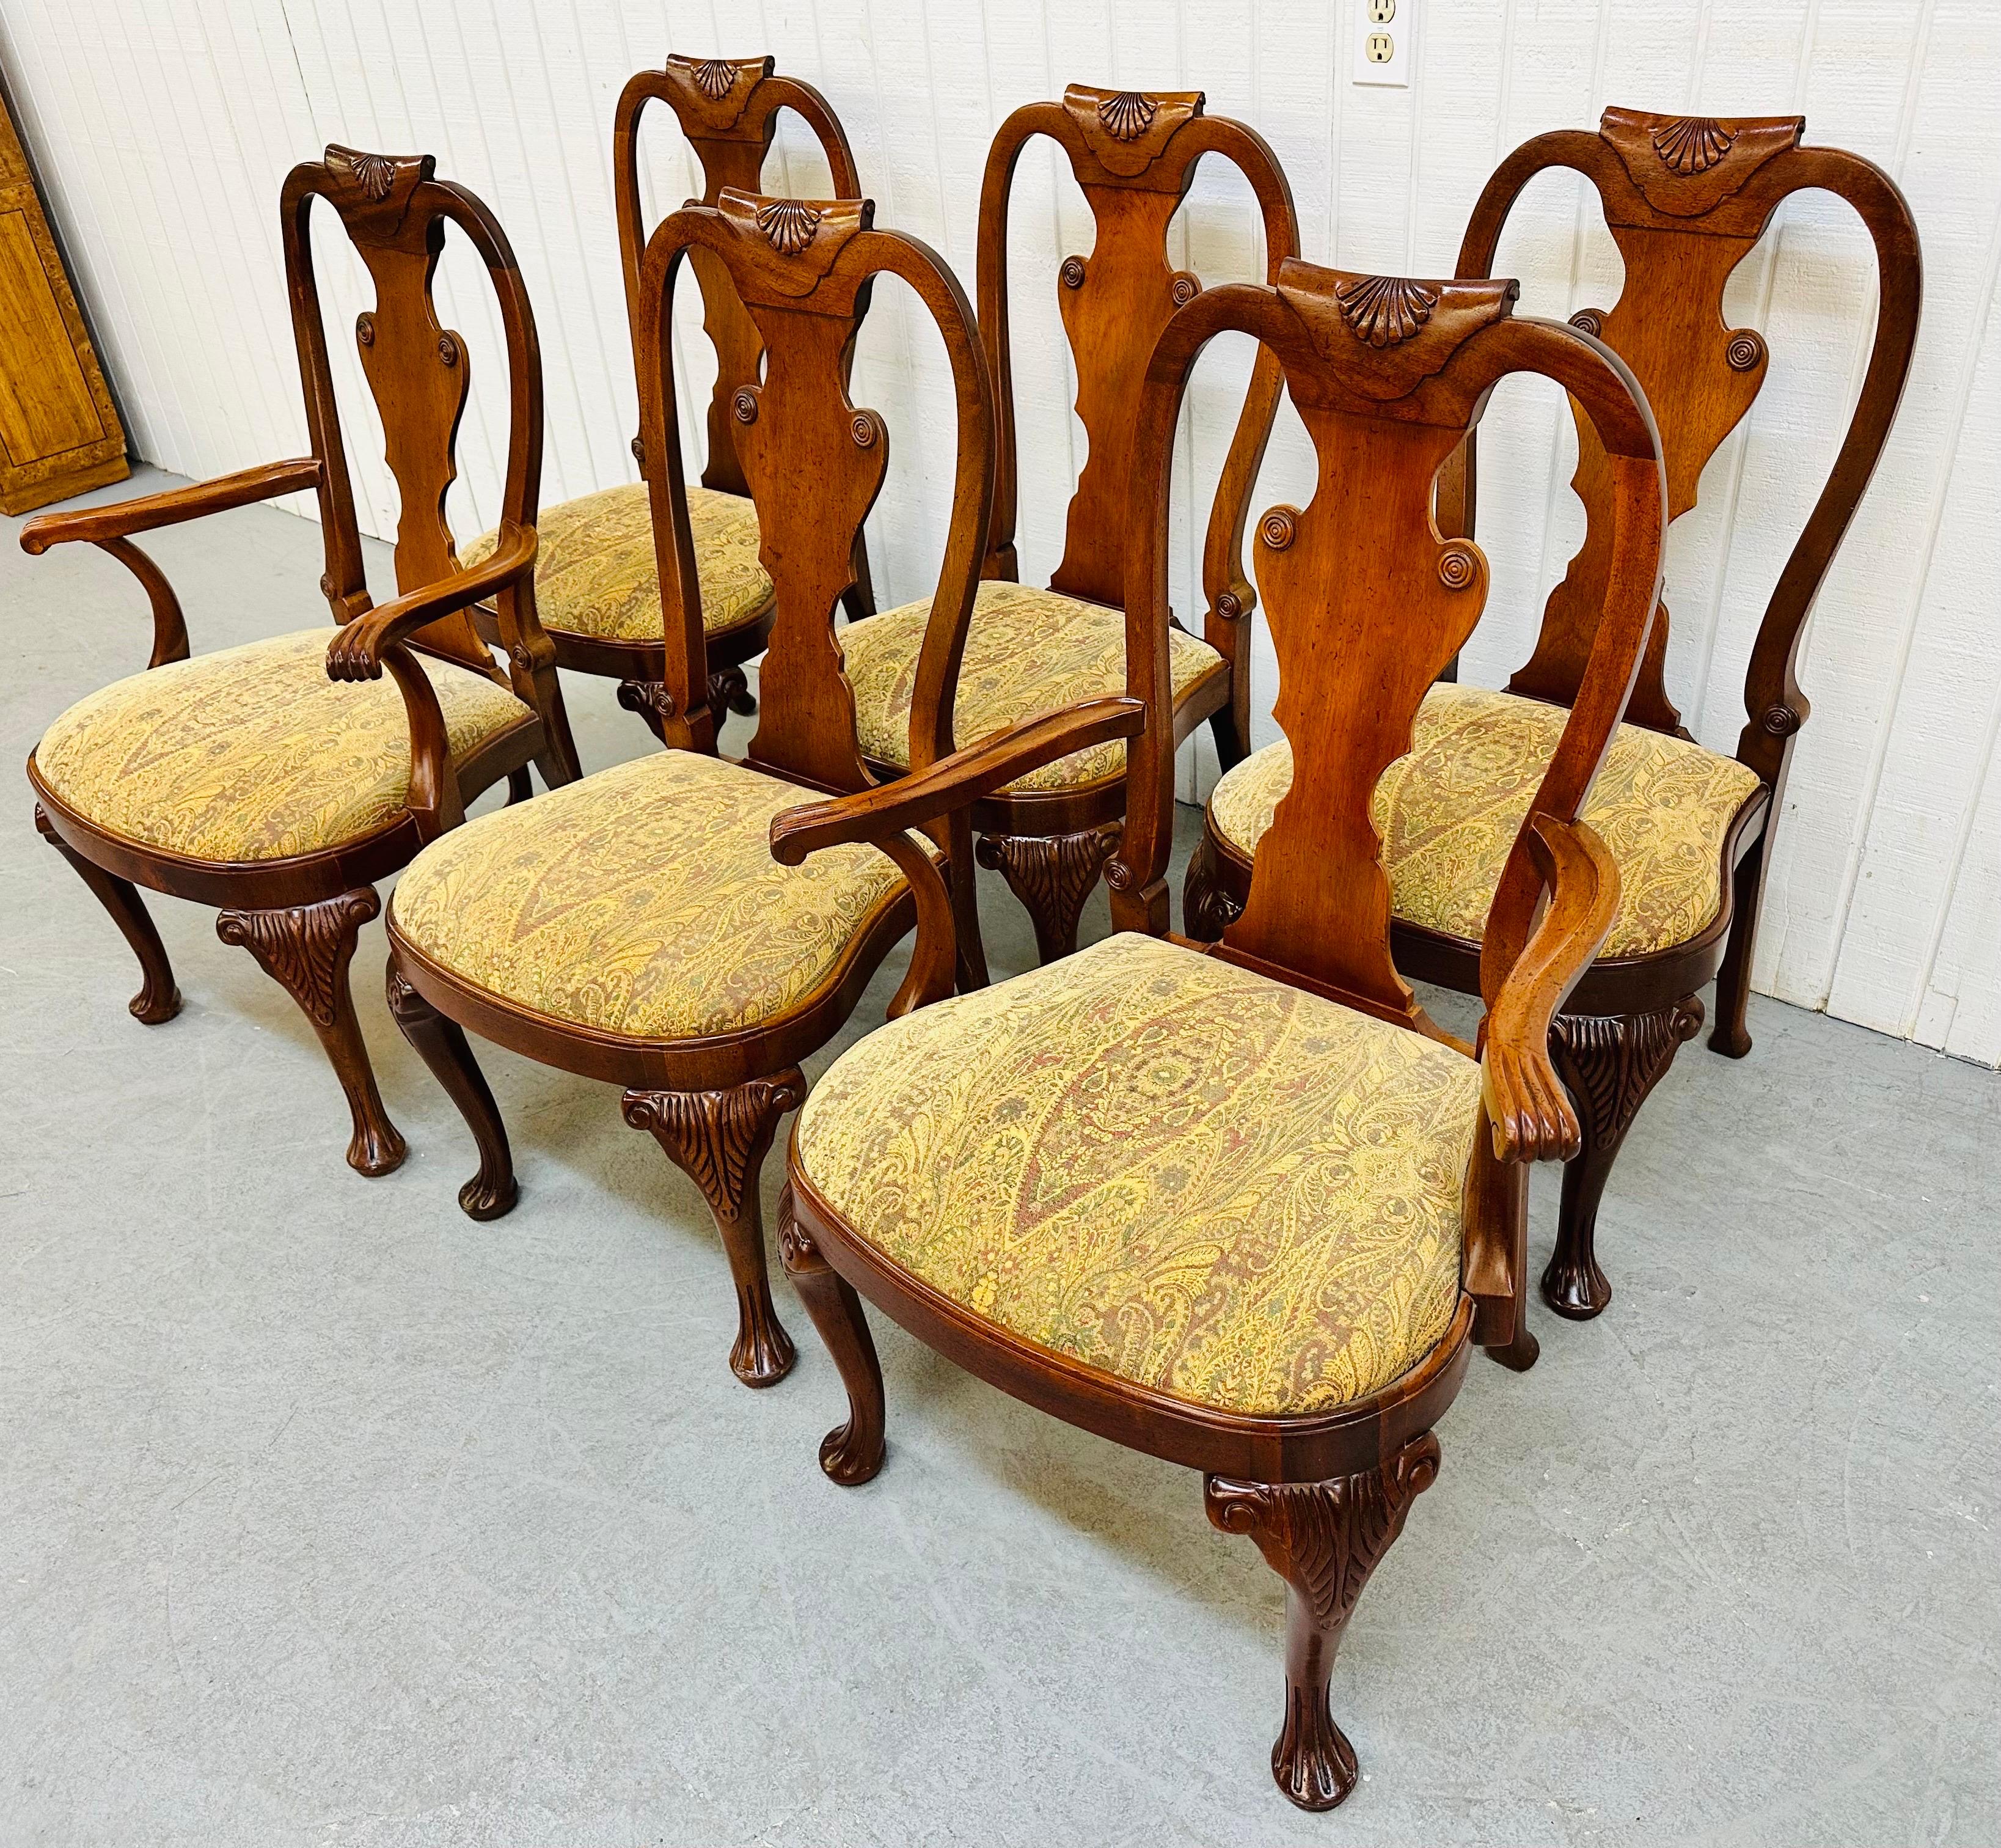 This listing is for a set of six vintage Baker Furniture Charleston Collection Mahogany Dining Chairs. Featuring two arm chairs, four straight chairs, original upholstery, a Queen Anne style leg, beautiful mahogany finish, detailed carved accents on